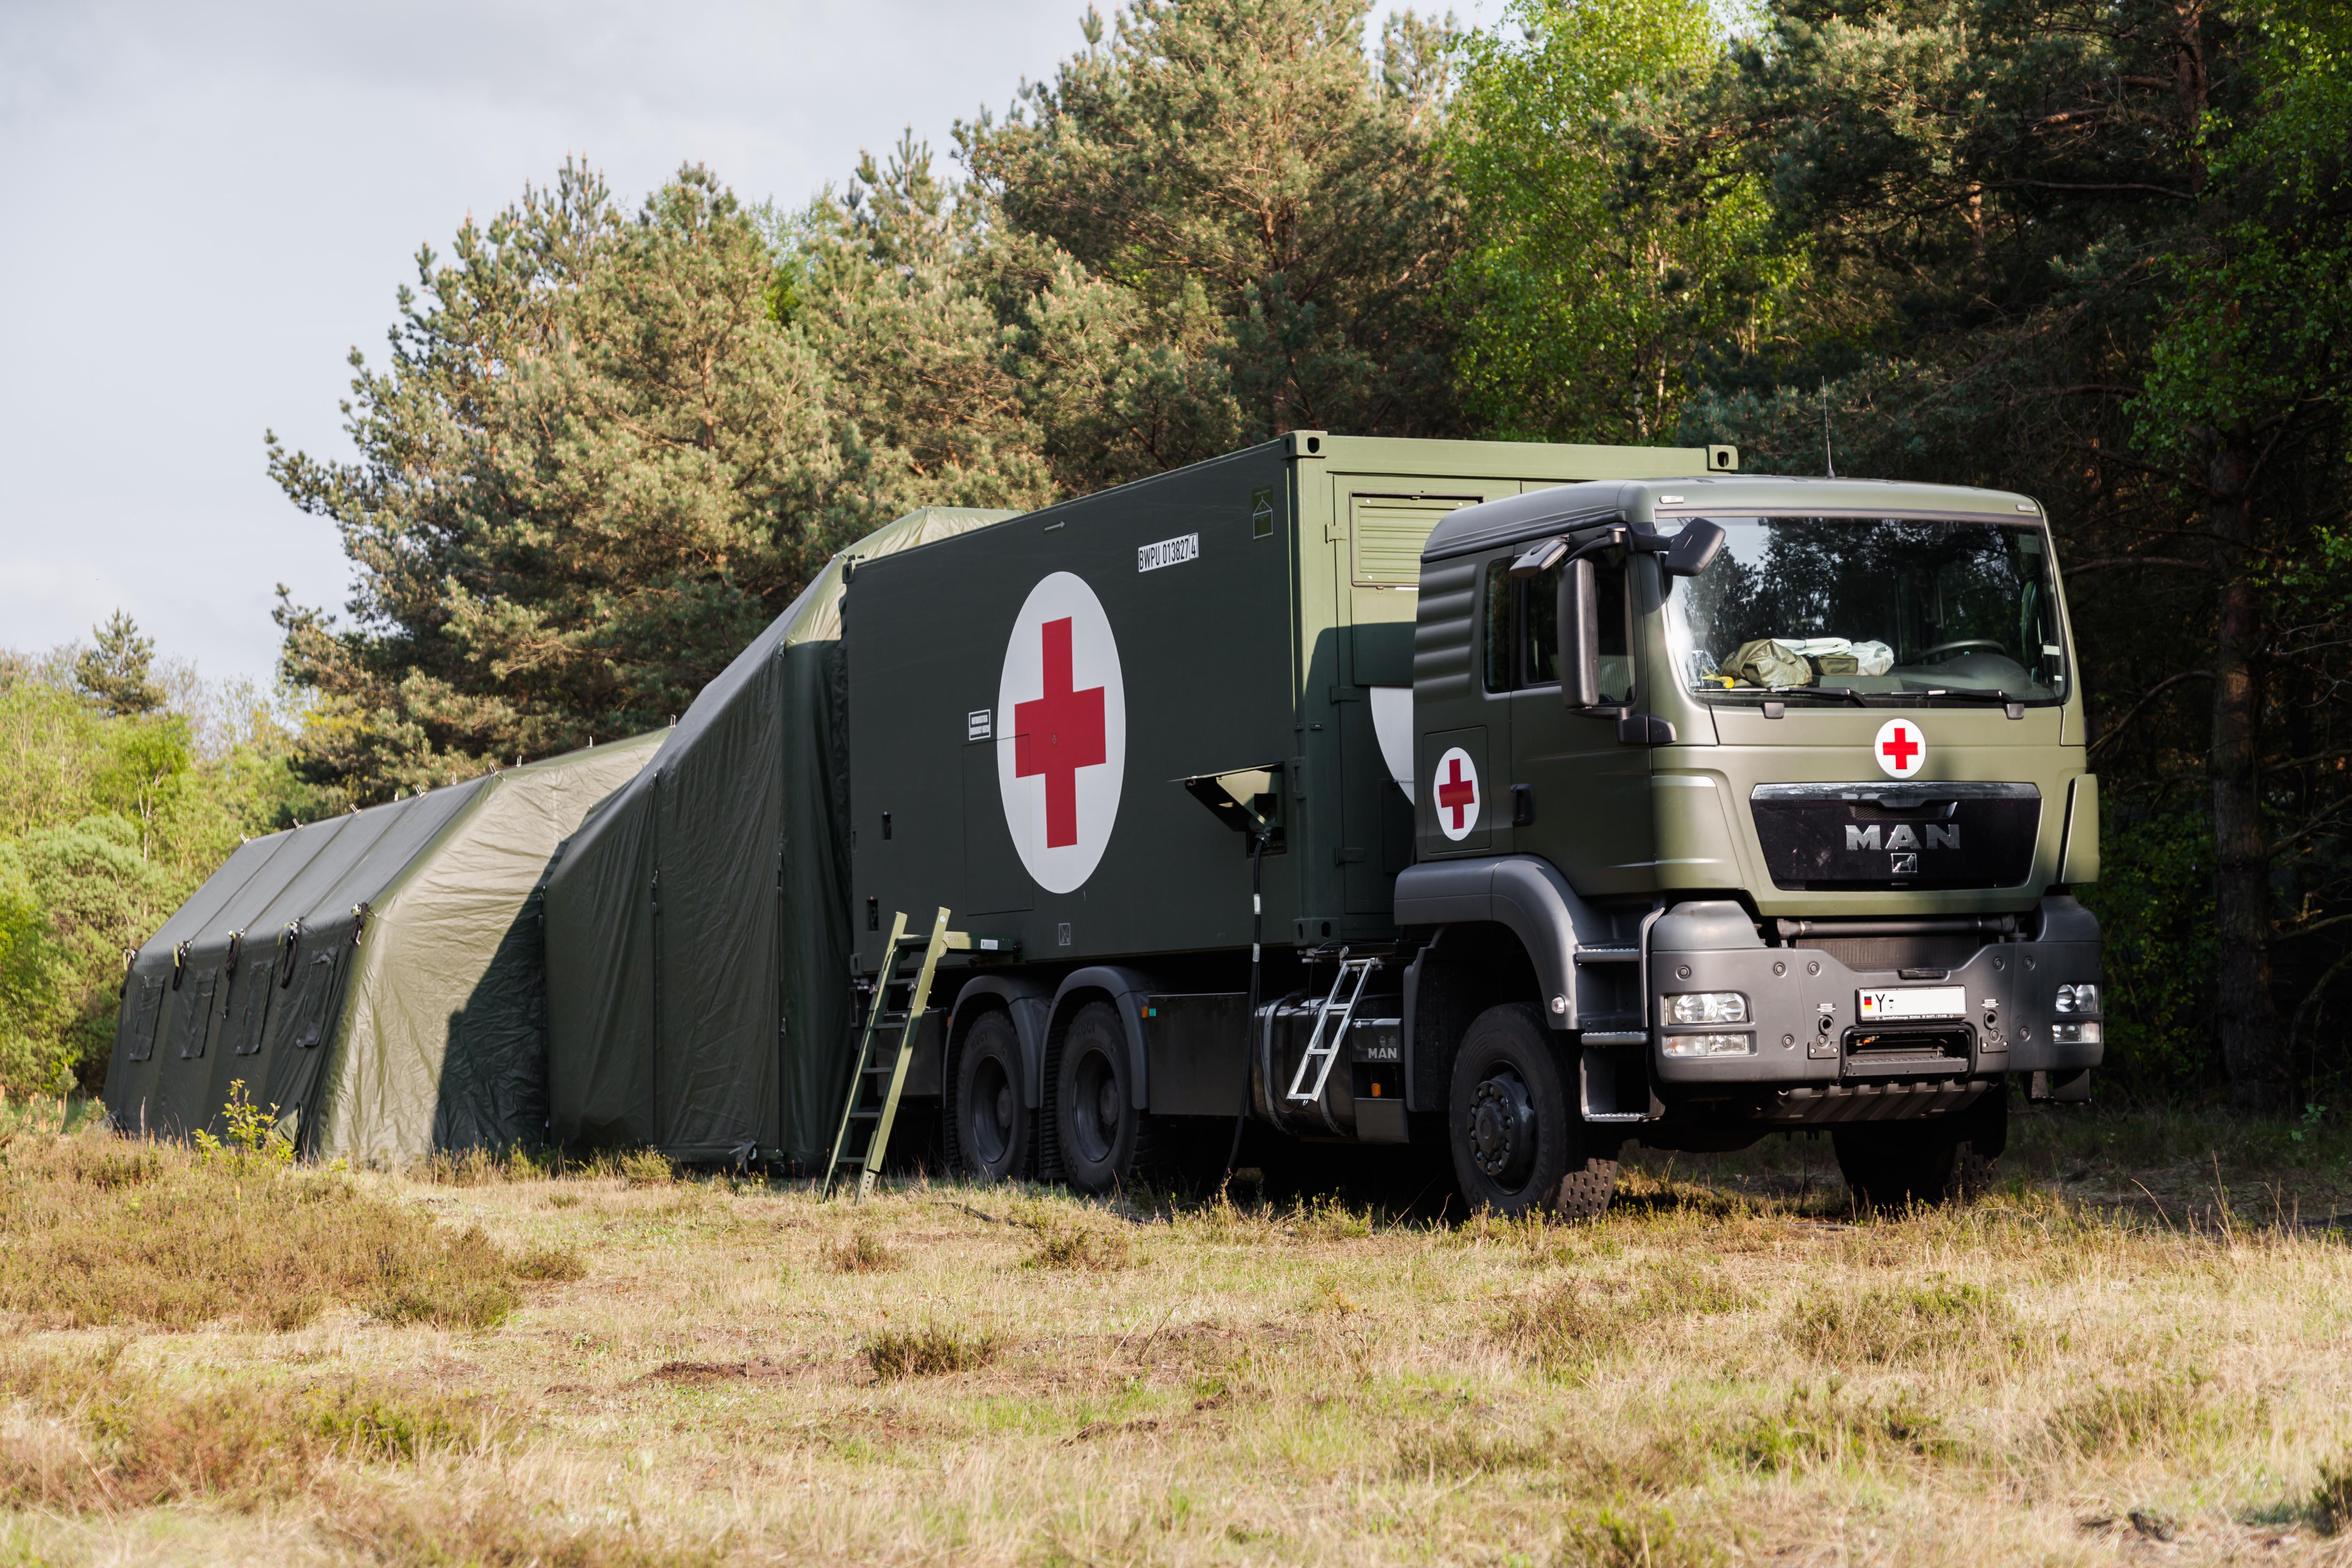 Medical transport vehicle with red cross on side